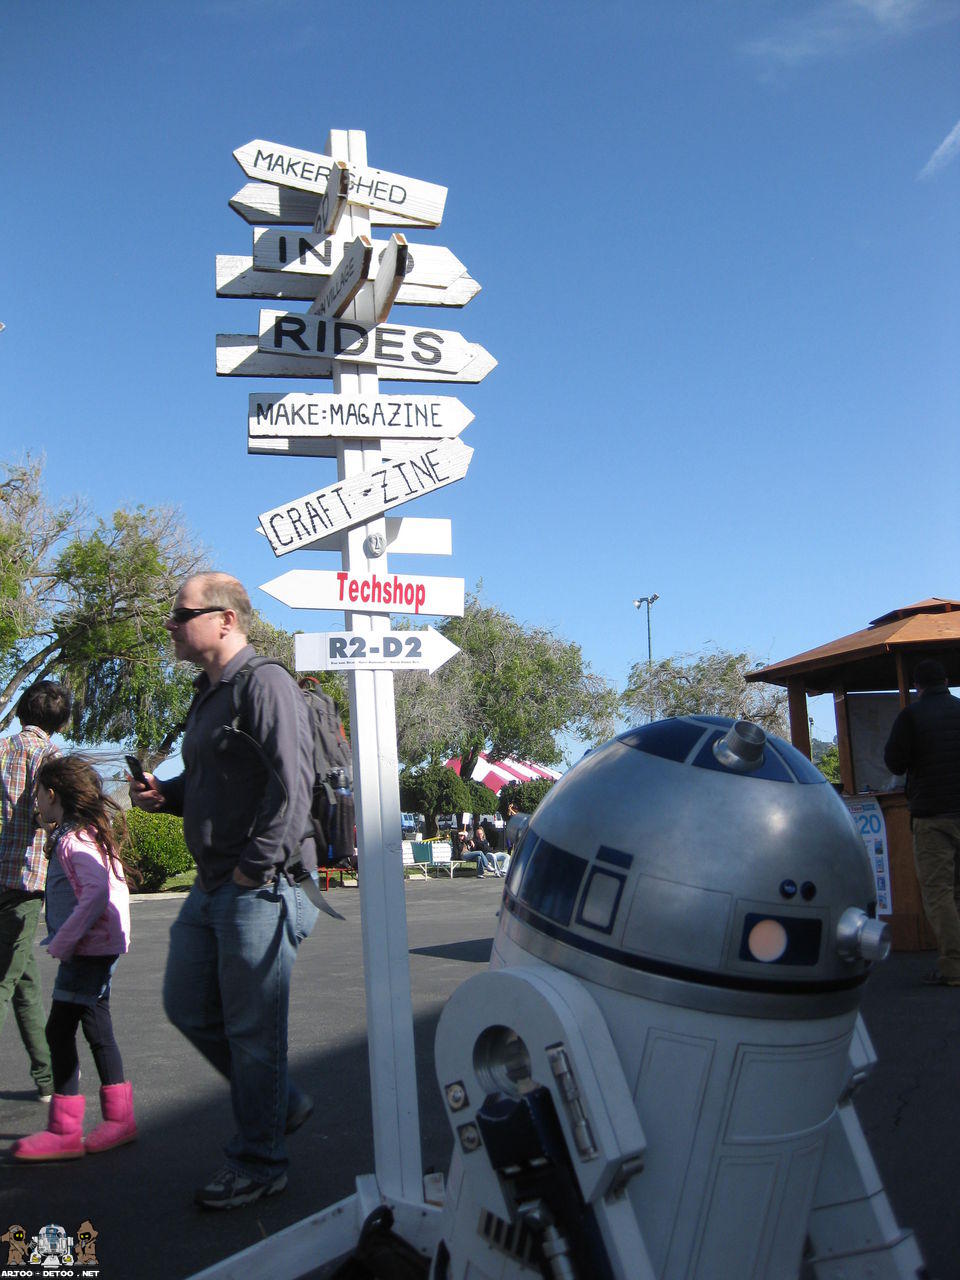 R2 trying to find his way